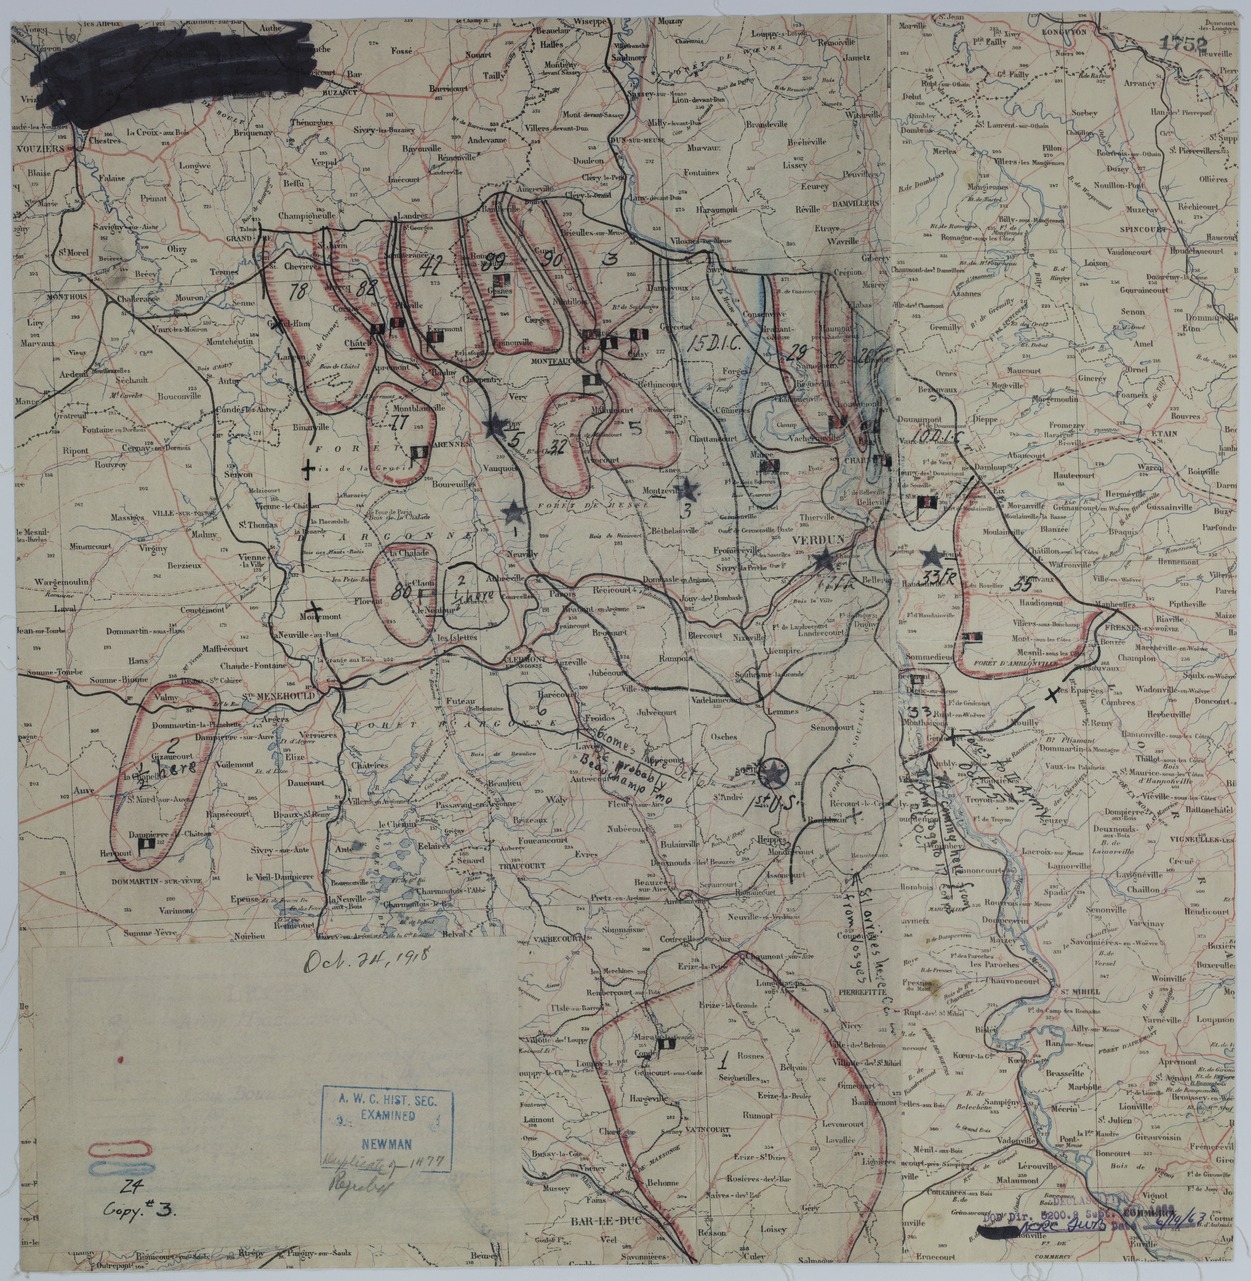 Map of Divisional Positions on October 24, 1918